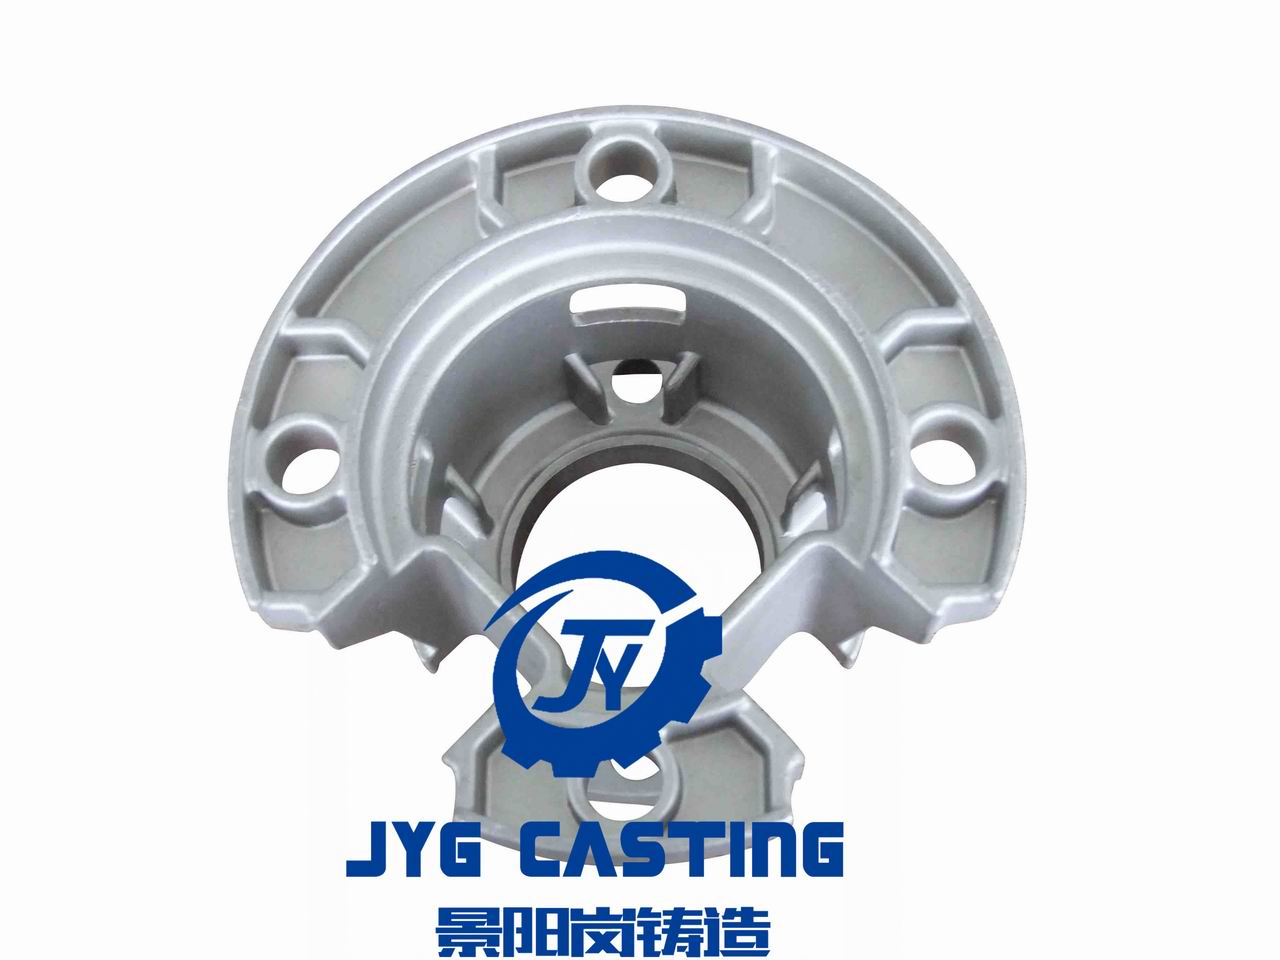 jyg-casting-customizes-quality-investment-casting-auto-parts-111004